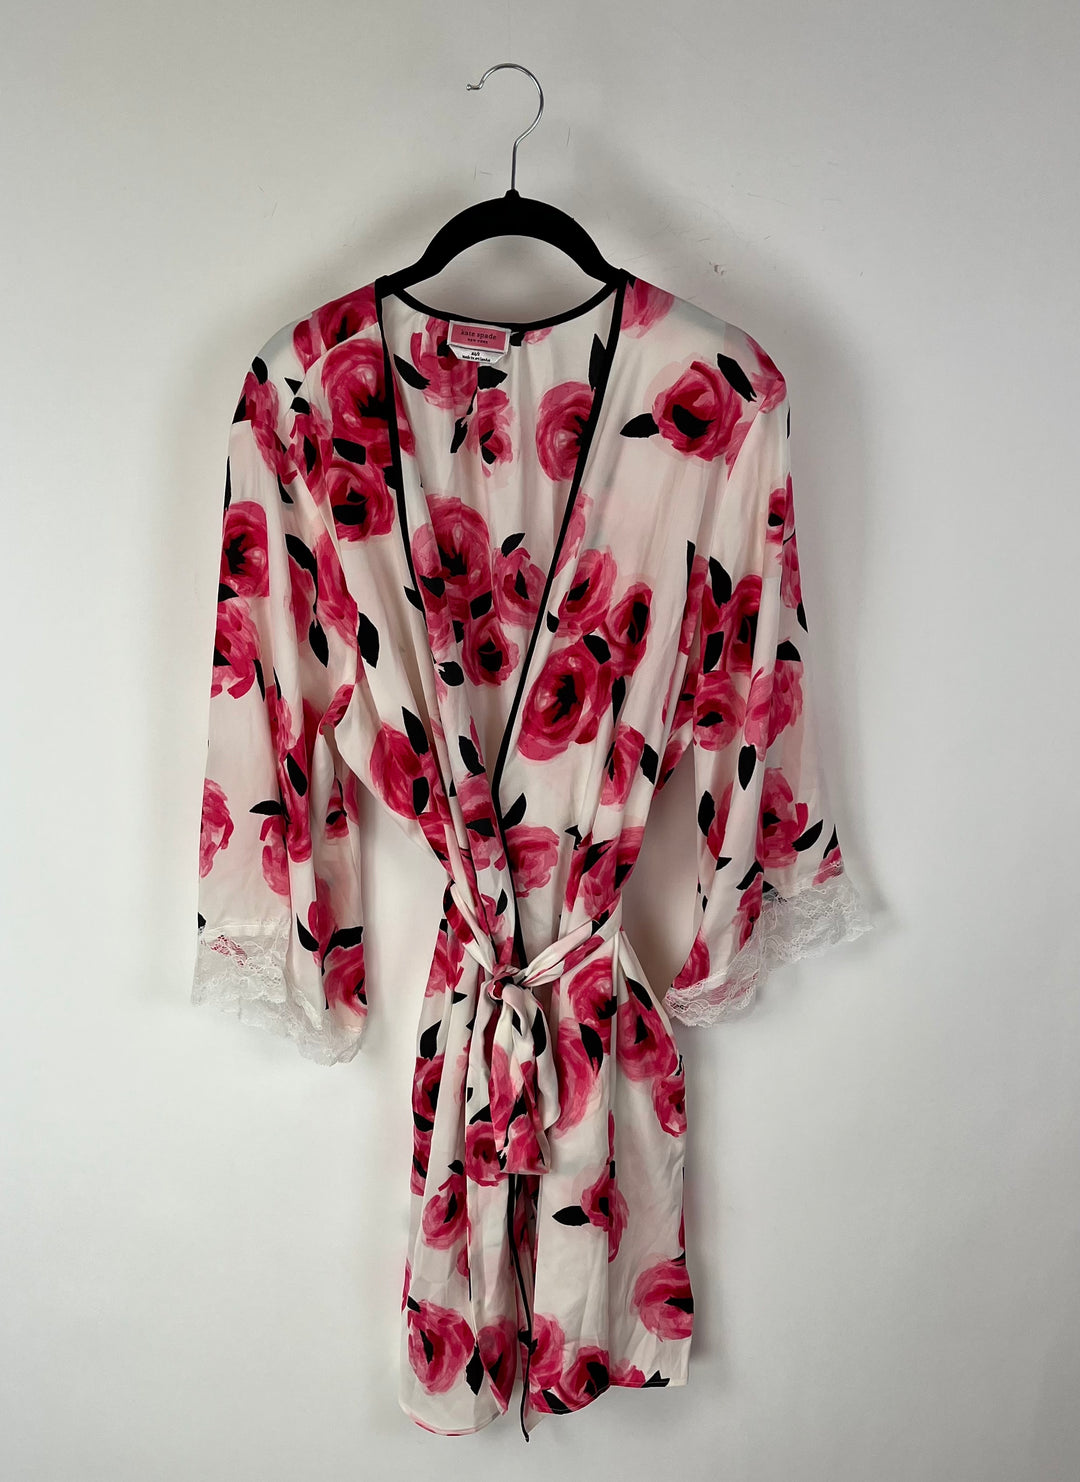 Pink And White Floral Robe - Extra Small/Small